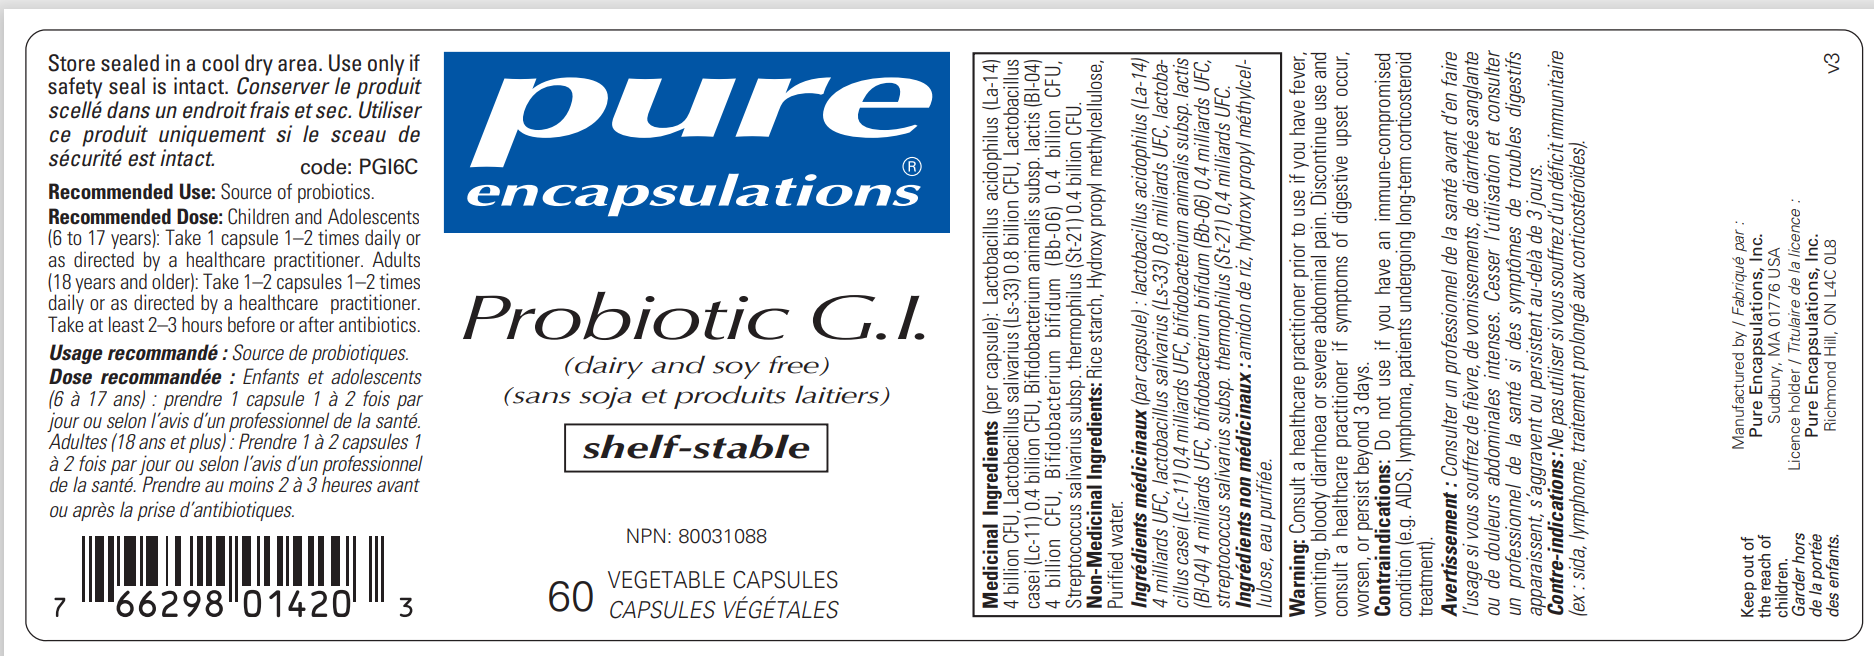 Pure Encapsulations Probiotic G.I. (Dairy and Soy-free)